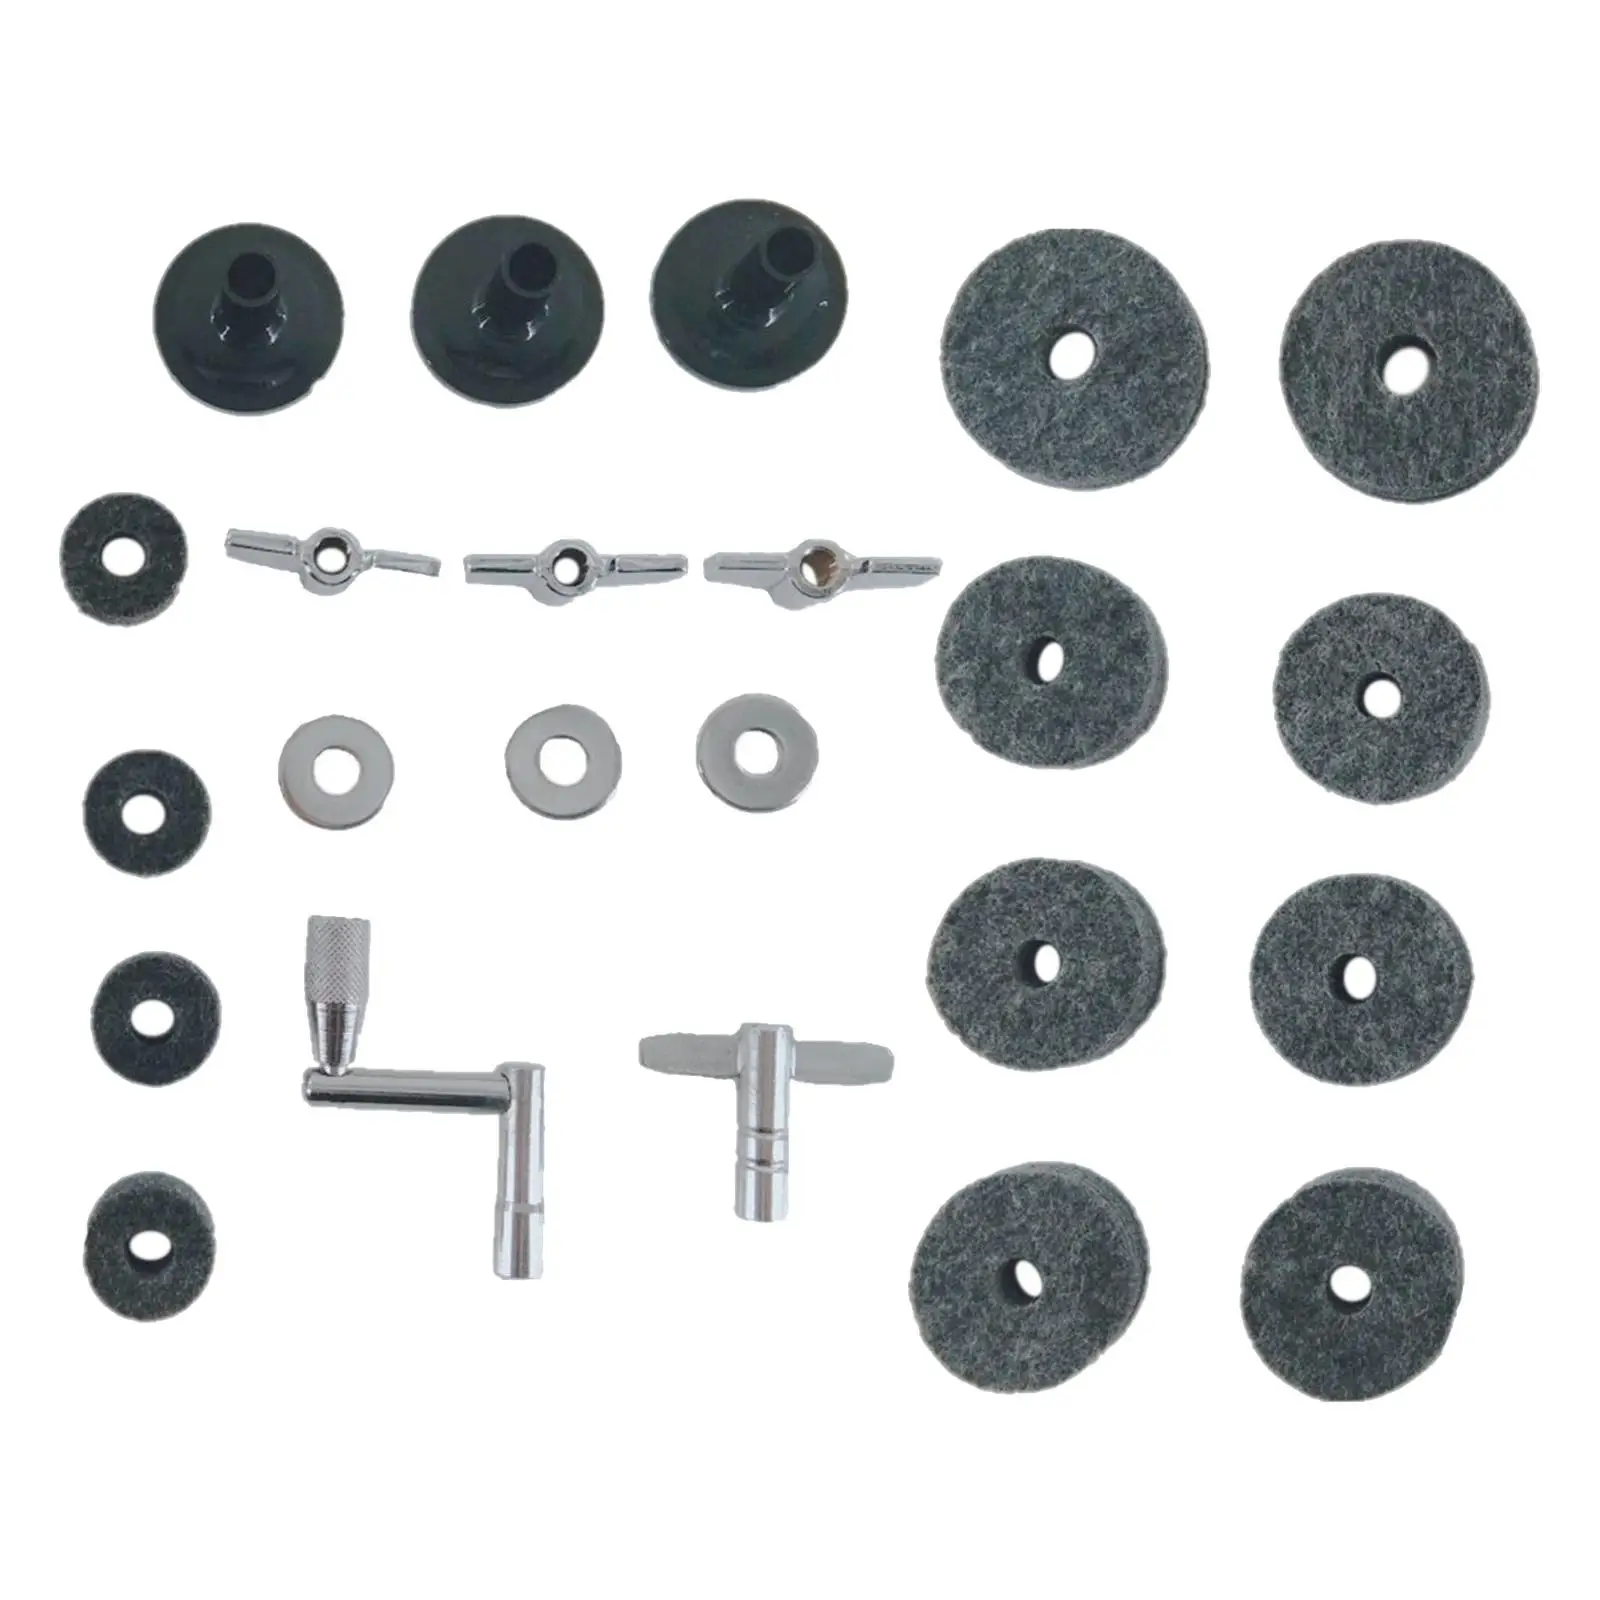 23x Replacement Cymbal Felt Washer Musical Accessories Replacement